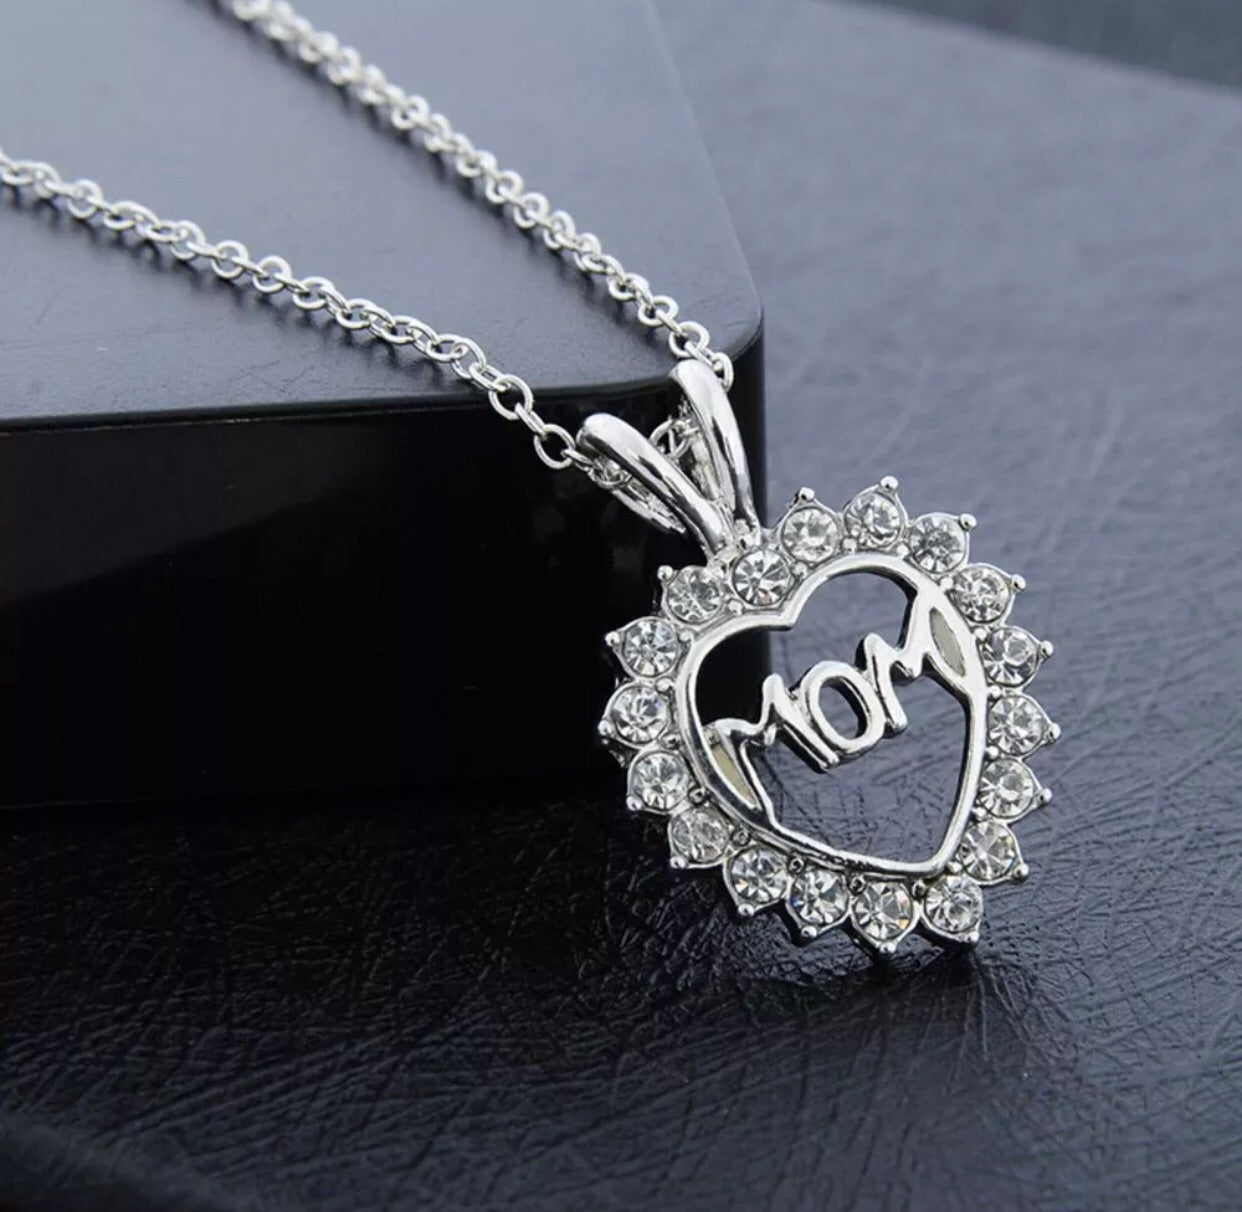 Crystal Heart Shaped Mom Pendant Necklace